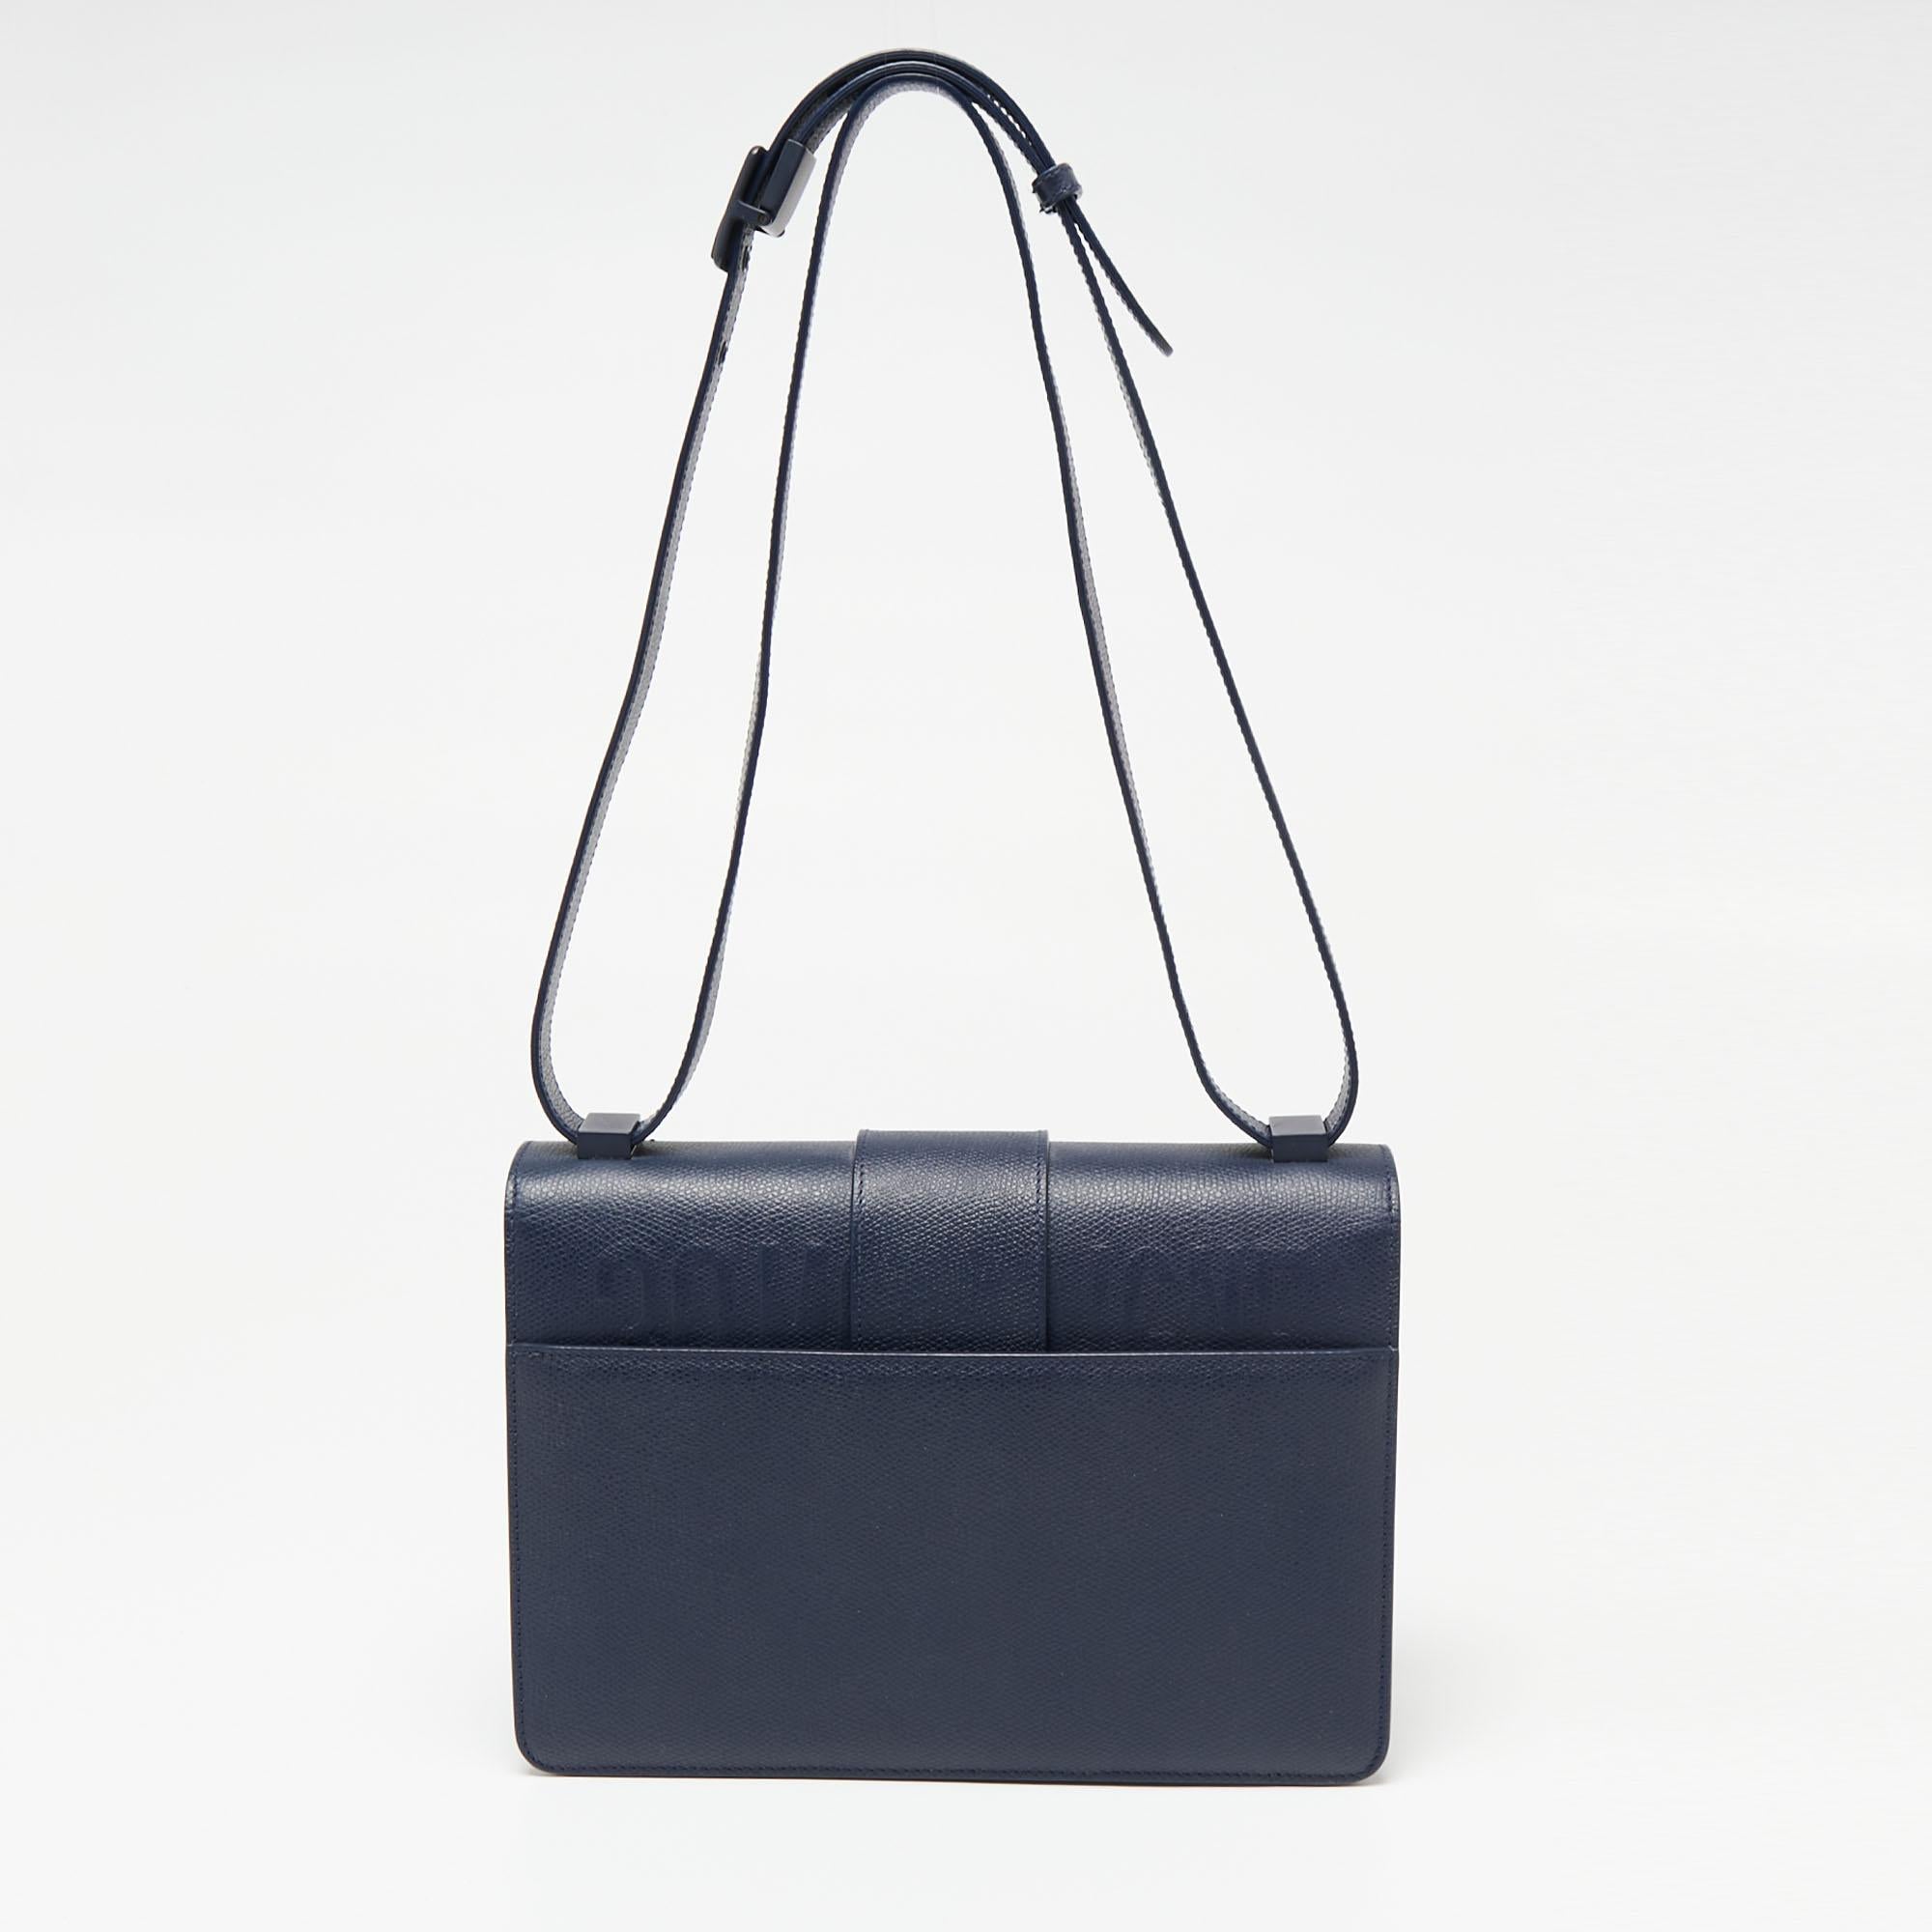 A fine collaboration of historical inspiration, artisanal savoir-faire, and signature brand aesthetic, this 30 Montaigne bag from Dior is a creation brimming with excellence and allure. This version displays a blue leather exterior with a tonal CD